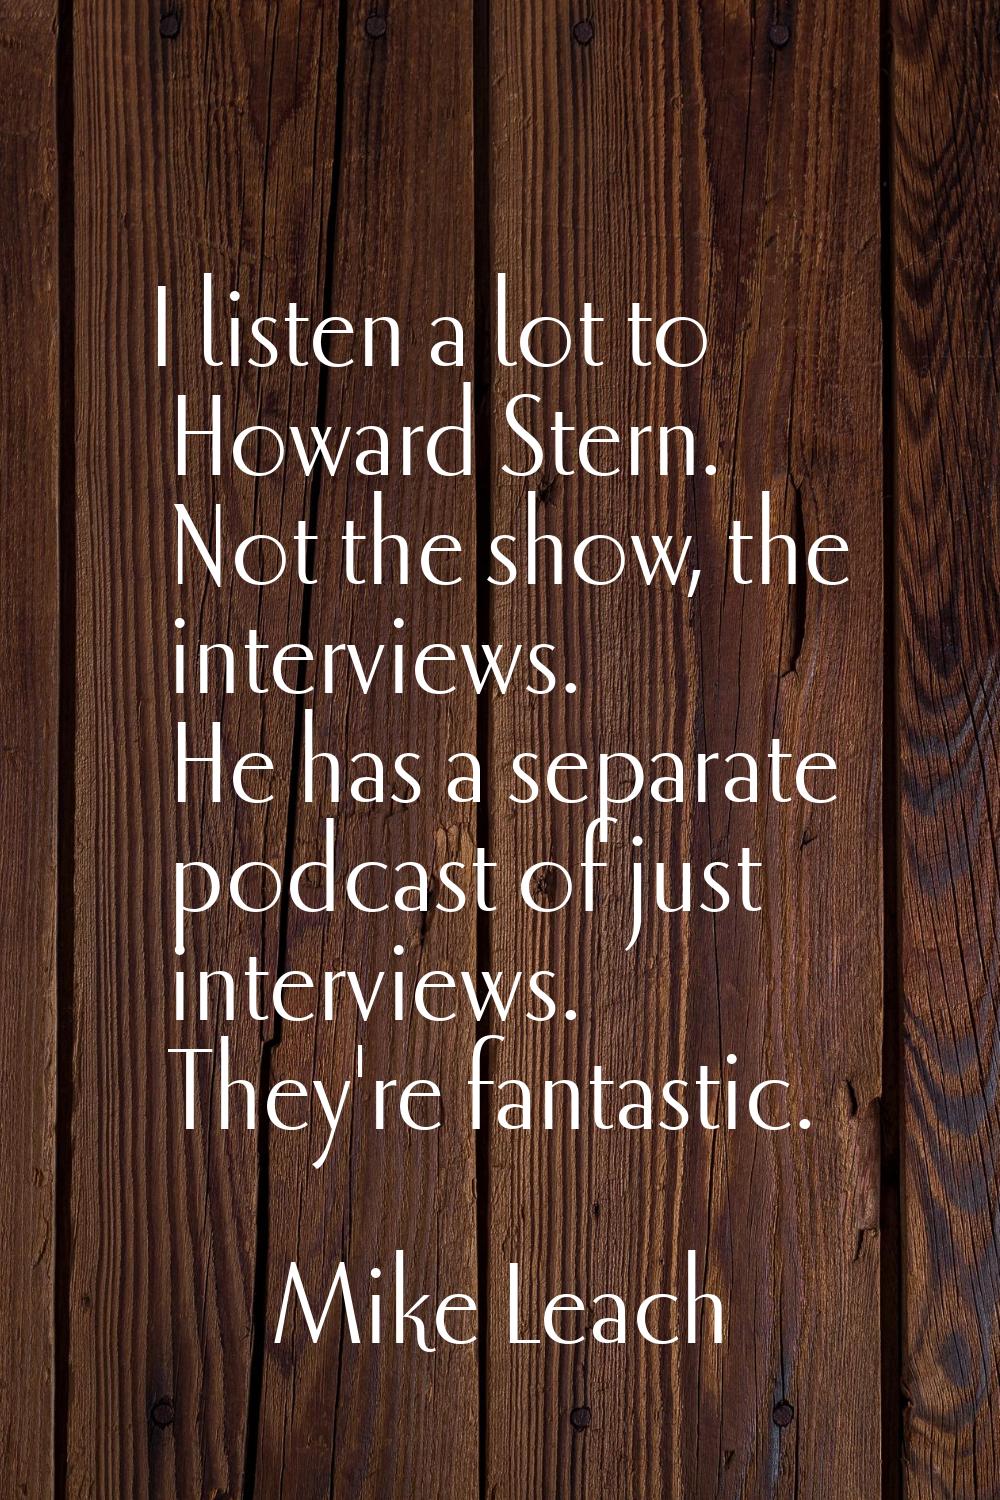 I listen a lot to Howard Stern. Not the show, the interviews. He has a separate podcast of just int